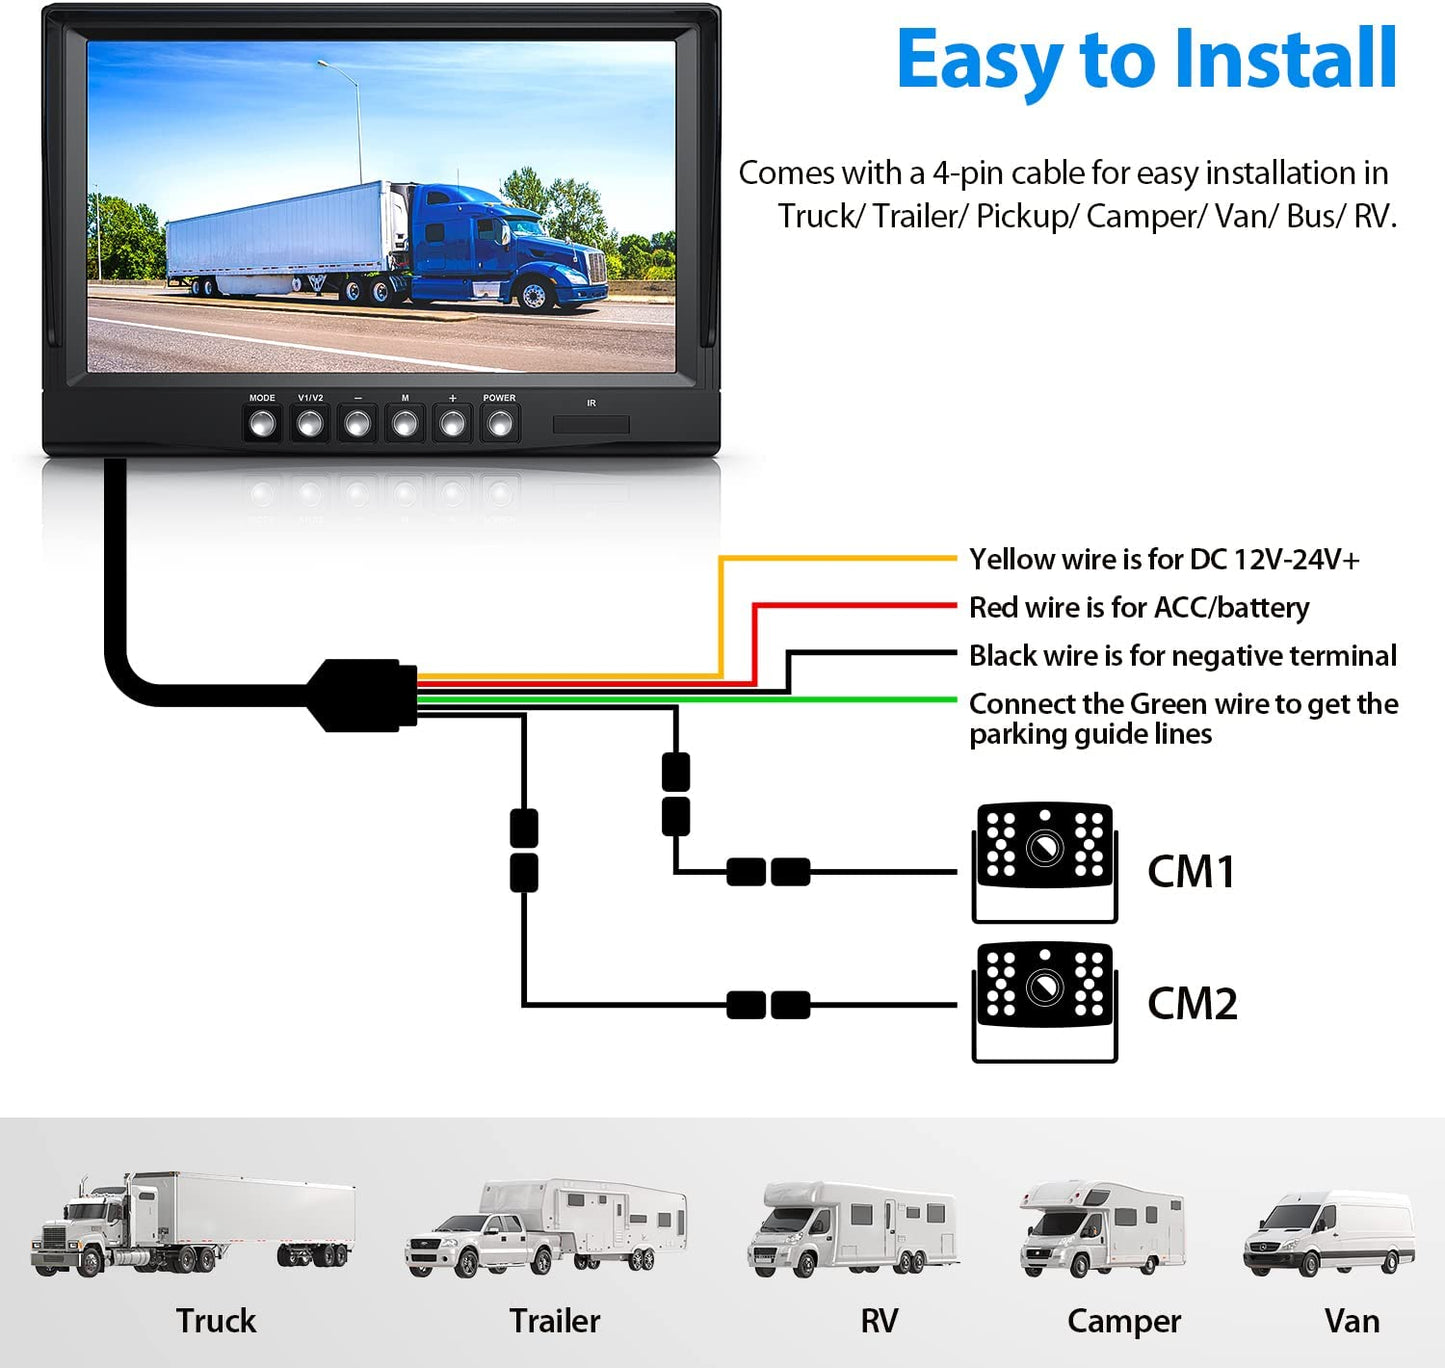 ZEROXCLUB HD Backup Camera System Kit, 9" Large Monitor with Loop Recording, Wired Rear View Camera, IR Night Vision 170° Waterproof Camera with Safe Parking Lines for Bus, Semi-Truck, Trailer, RV--BY902A